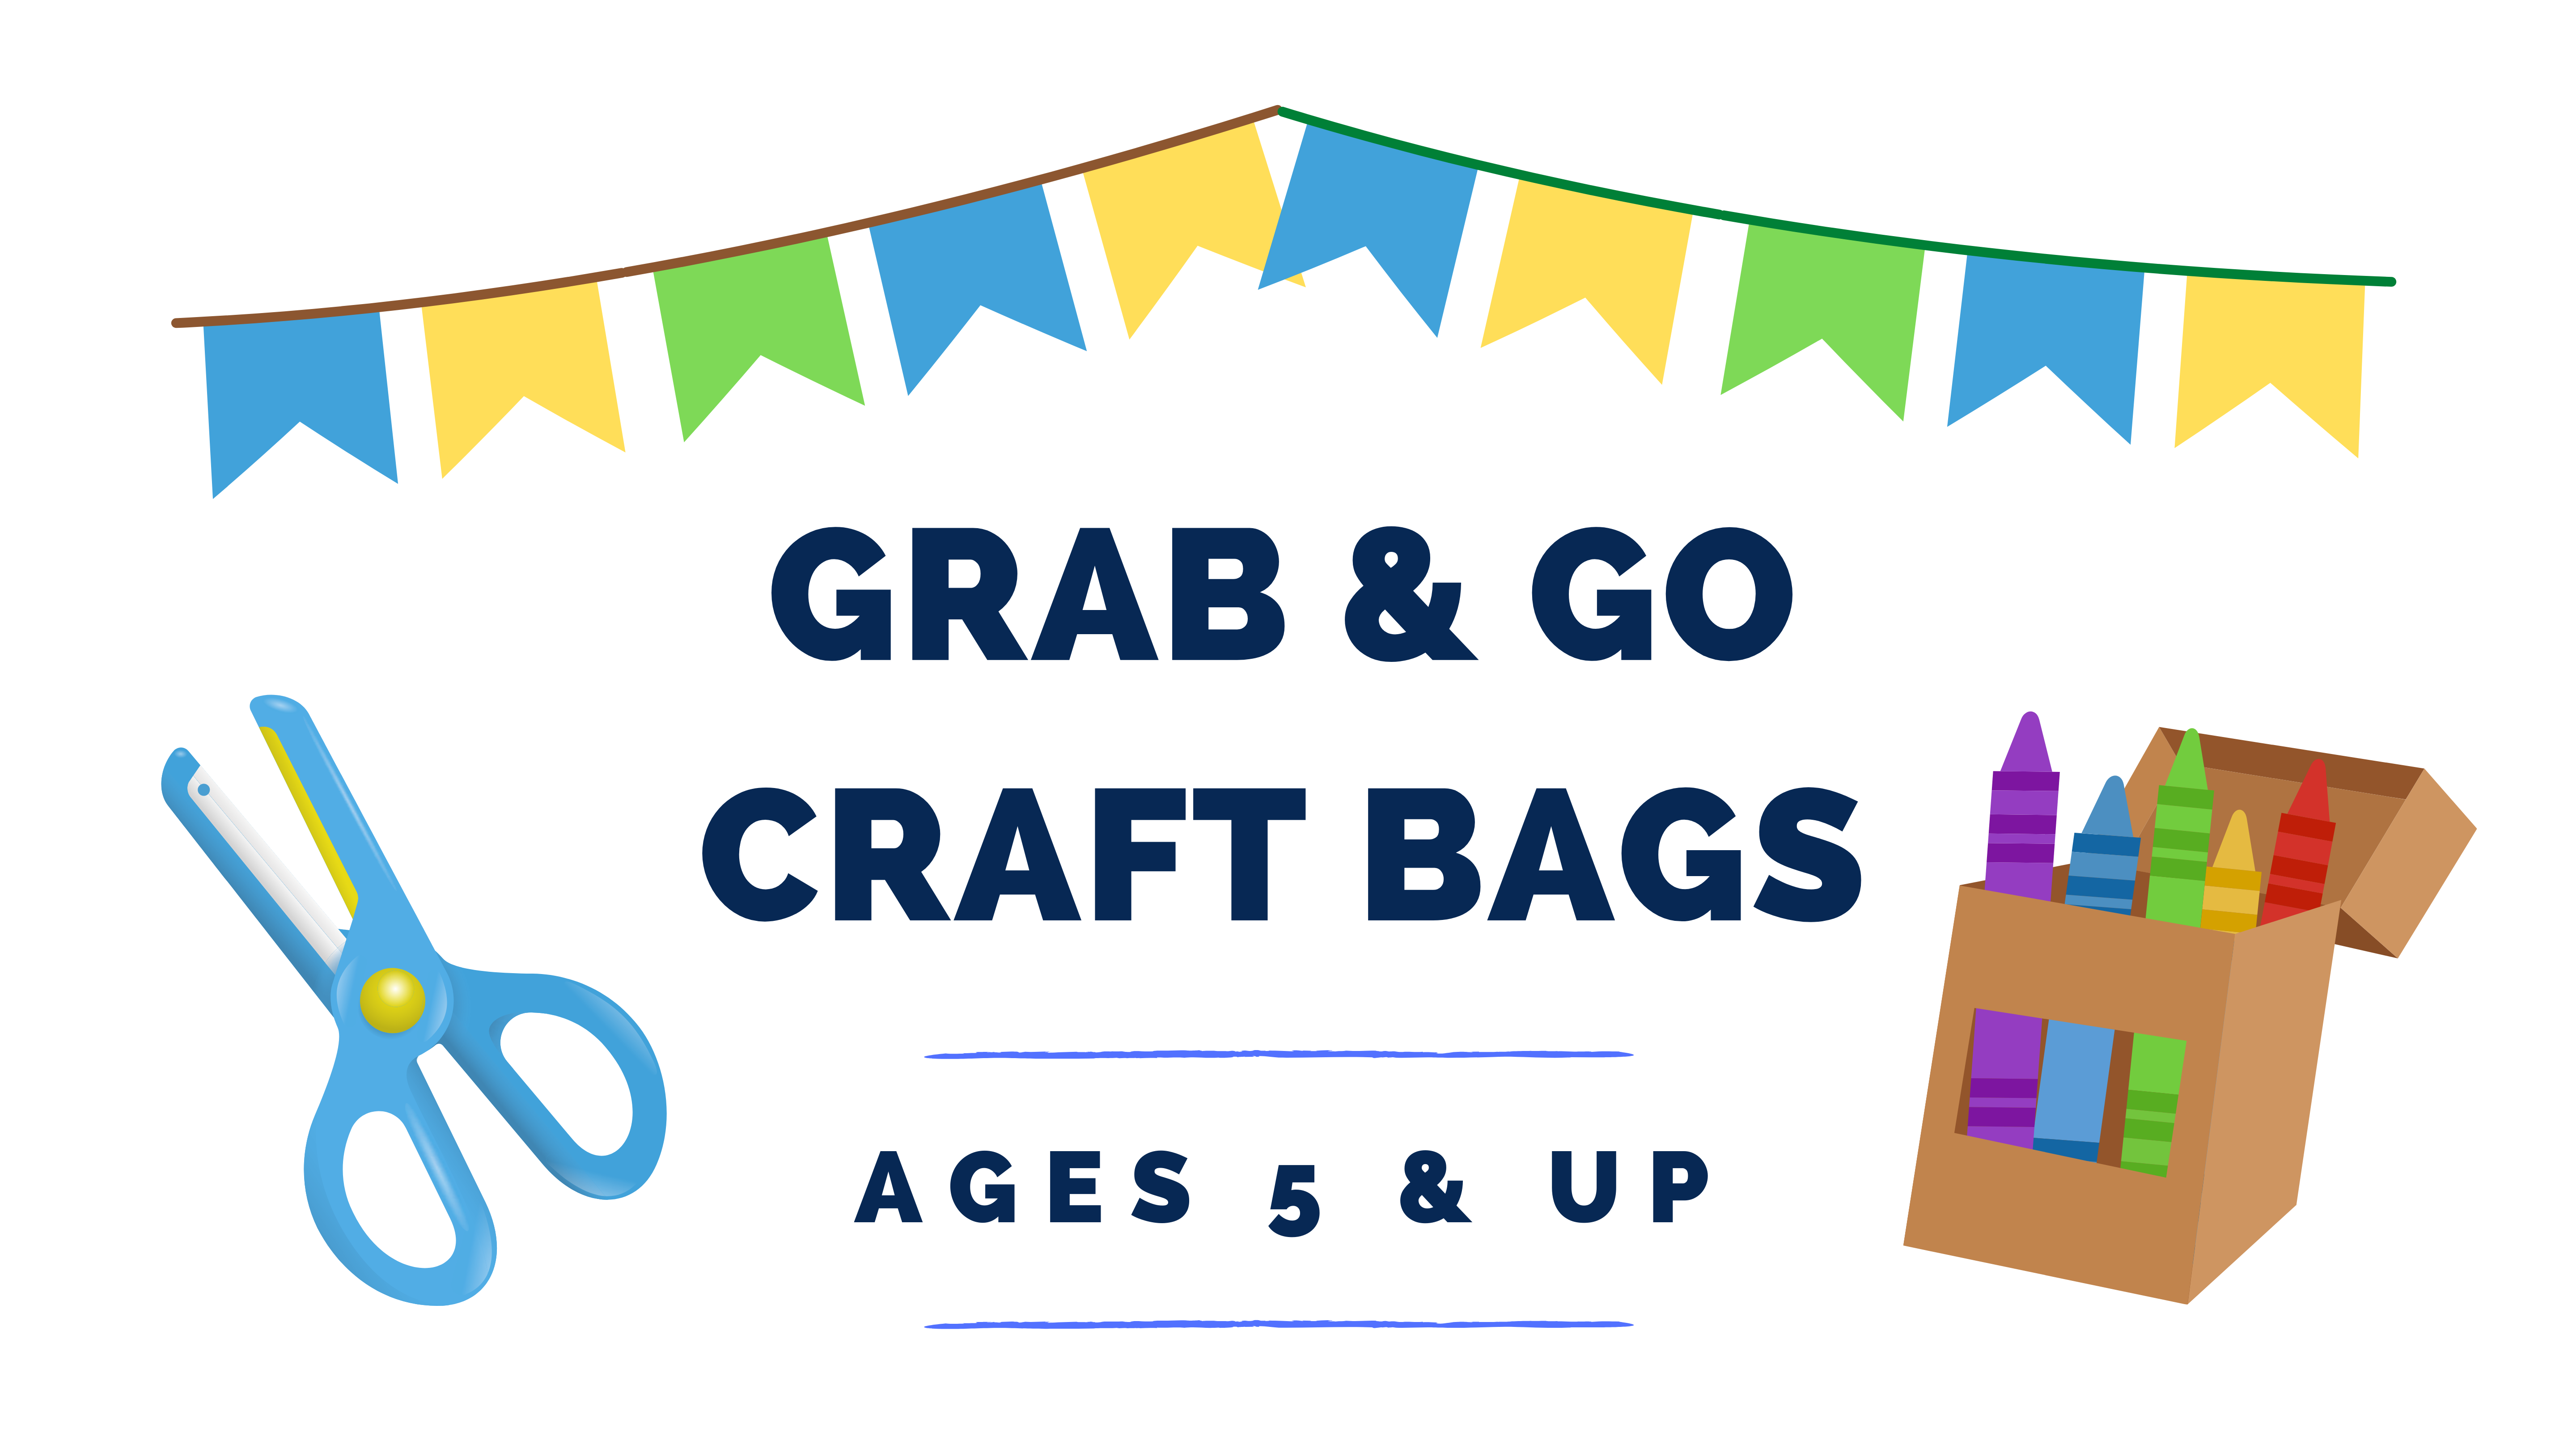 Grab & Go Craft Bags ages 5 & up